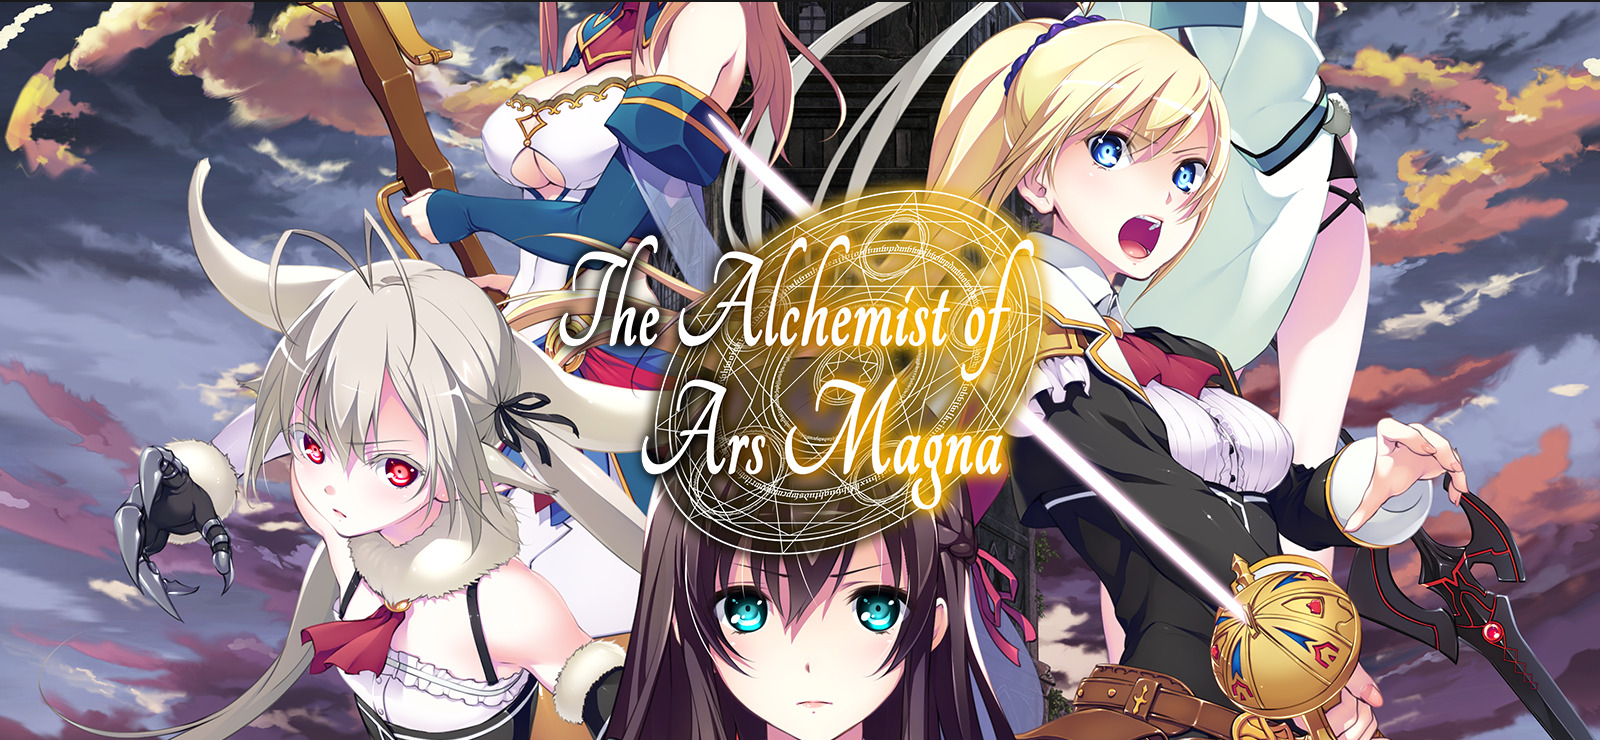 free download The Alchemist of Ars Magna